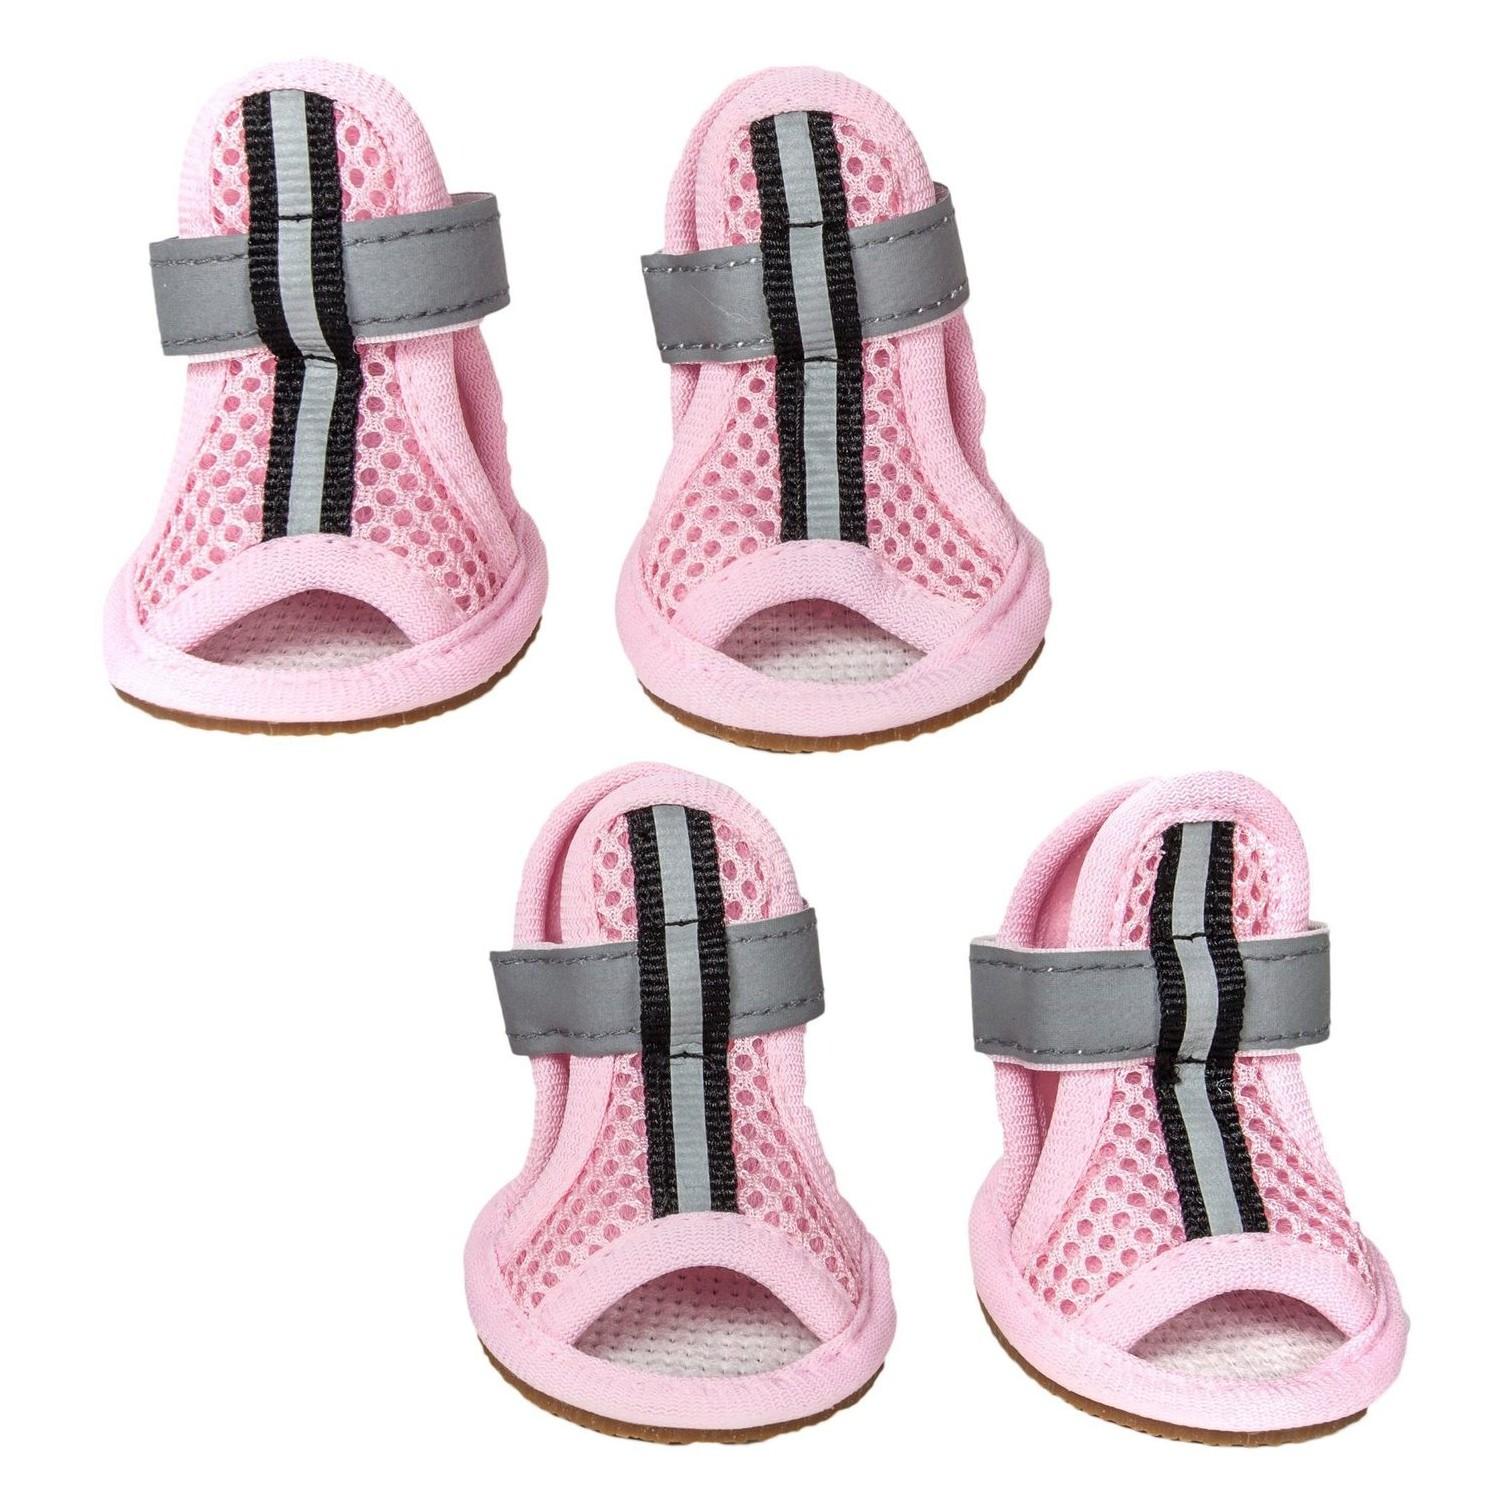 Pet Life Sporty-Supportive Water-Resistant Mesh Dog Sandals Shoes - Pink